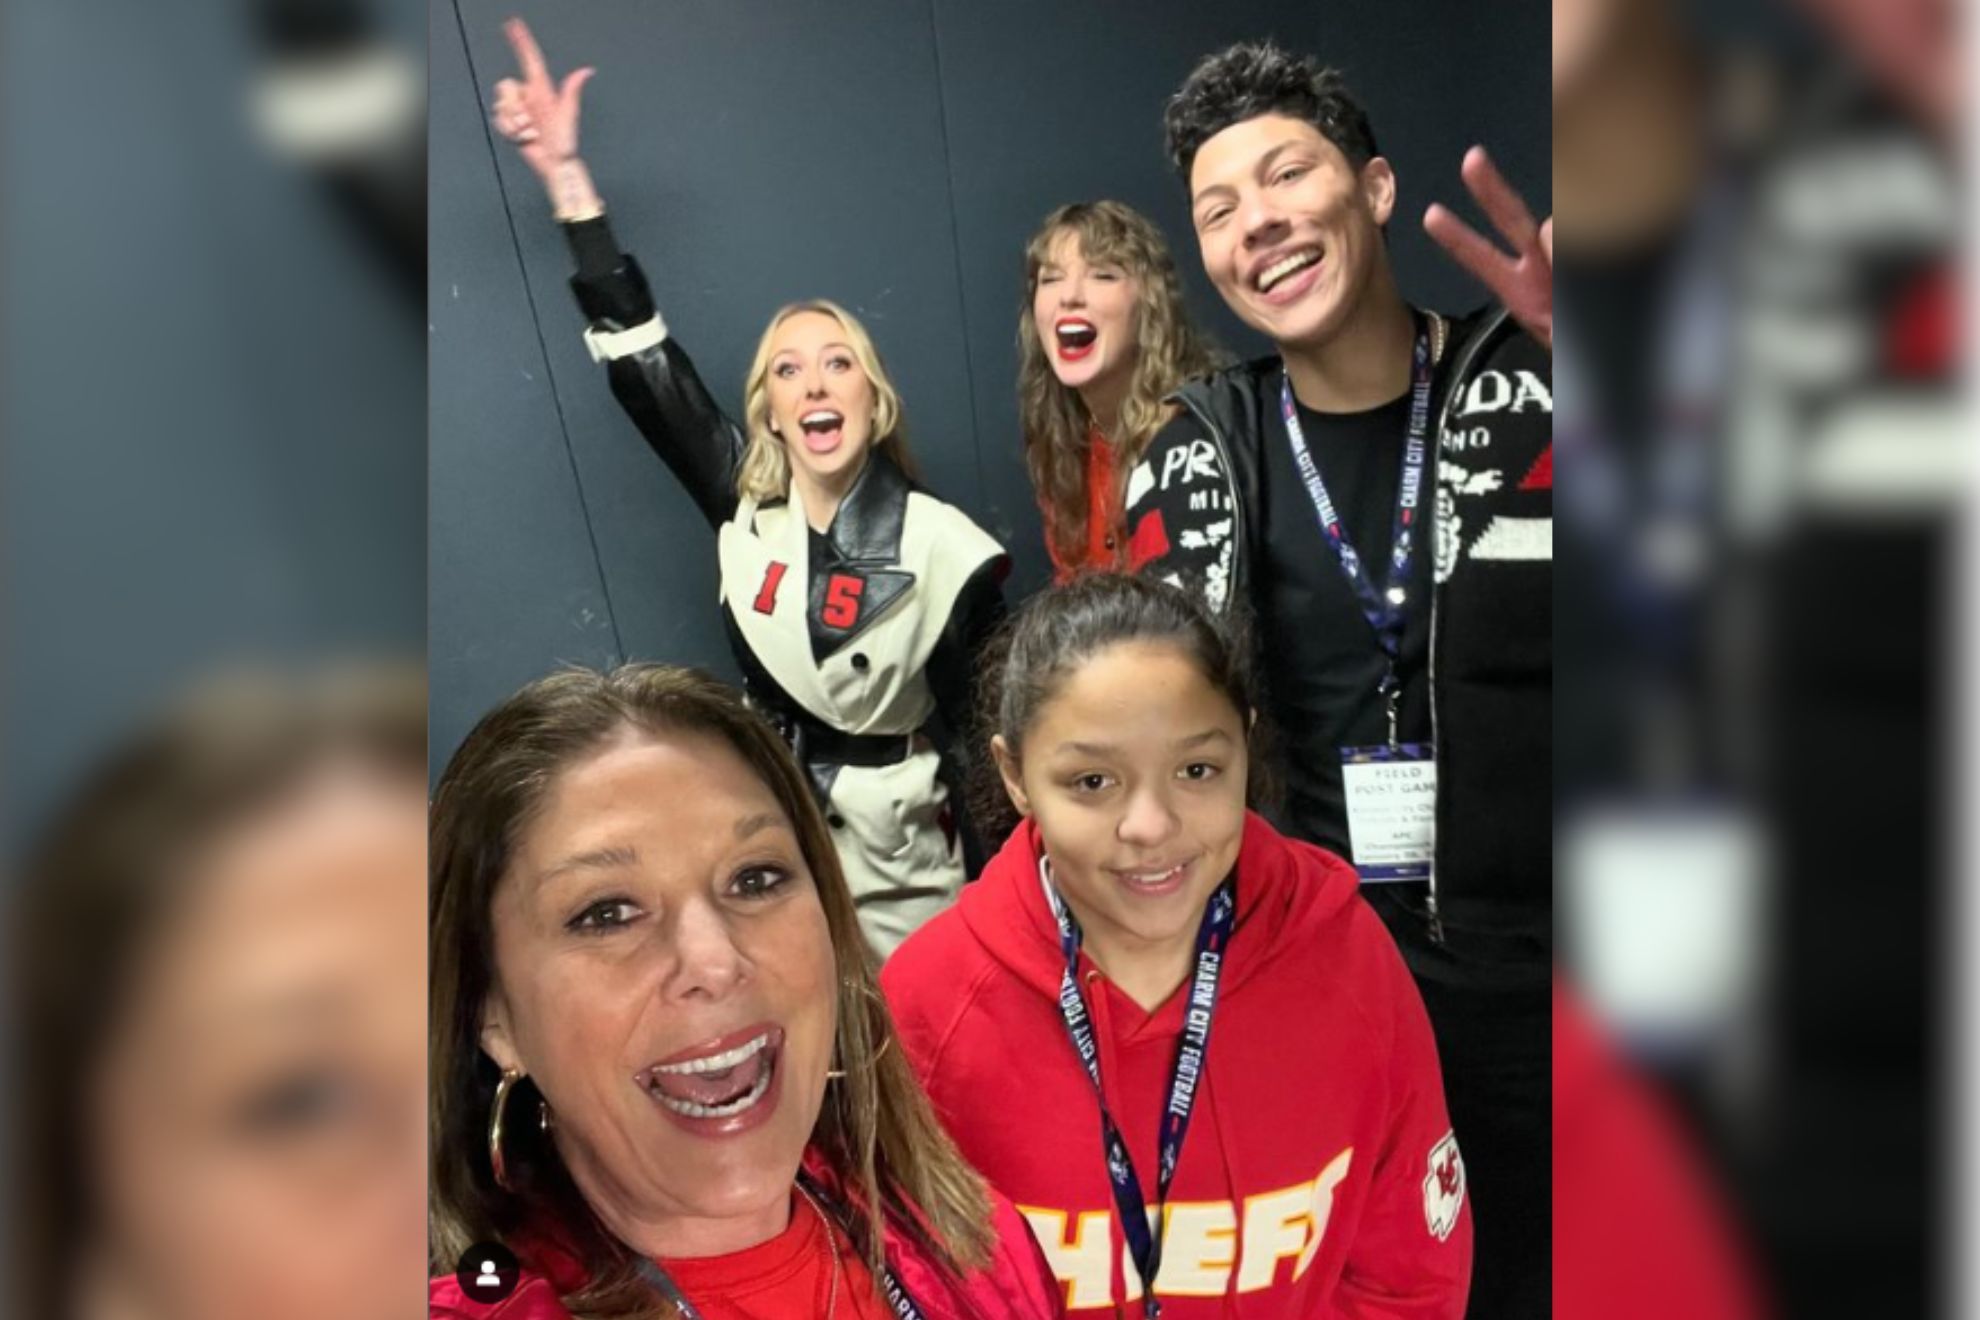 Patrick Mahomes mom, Randi, finally got her coveted selfie with Taylor Swift